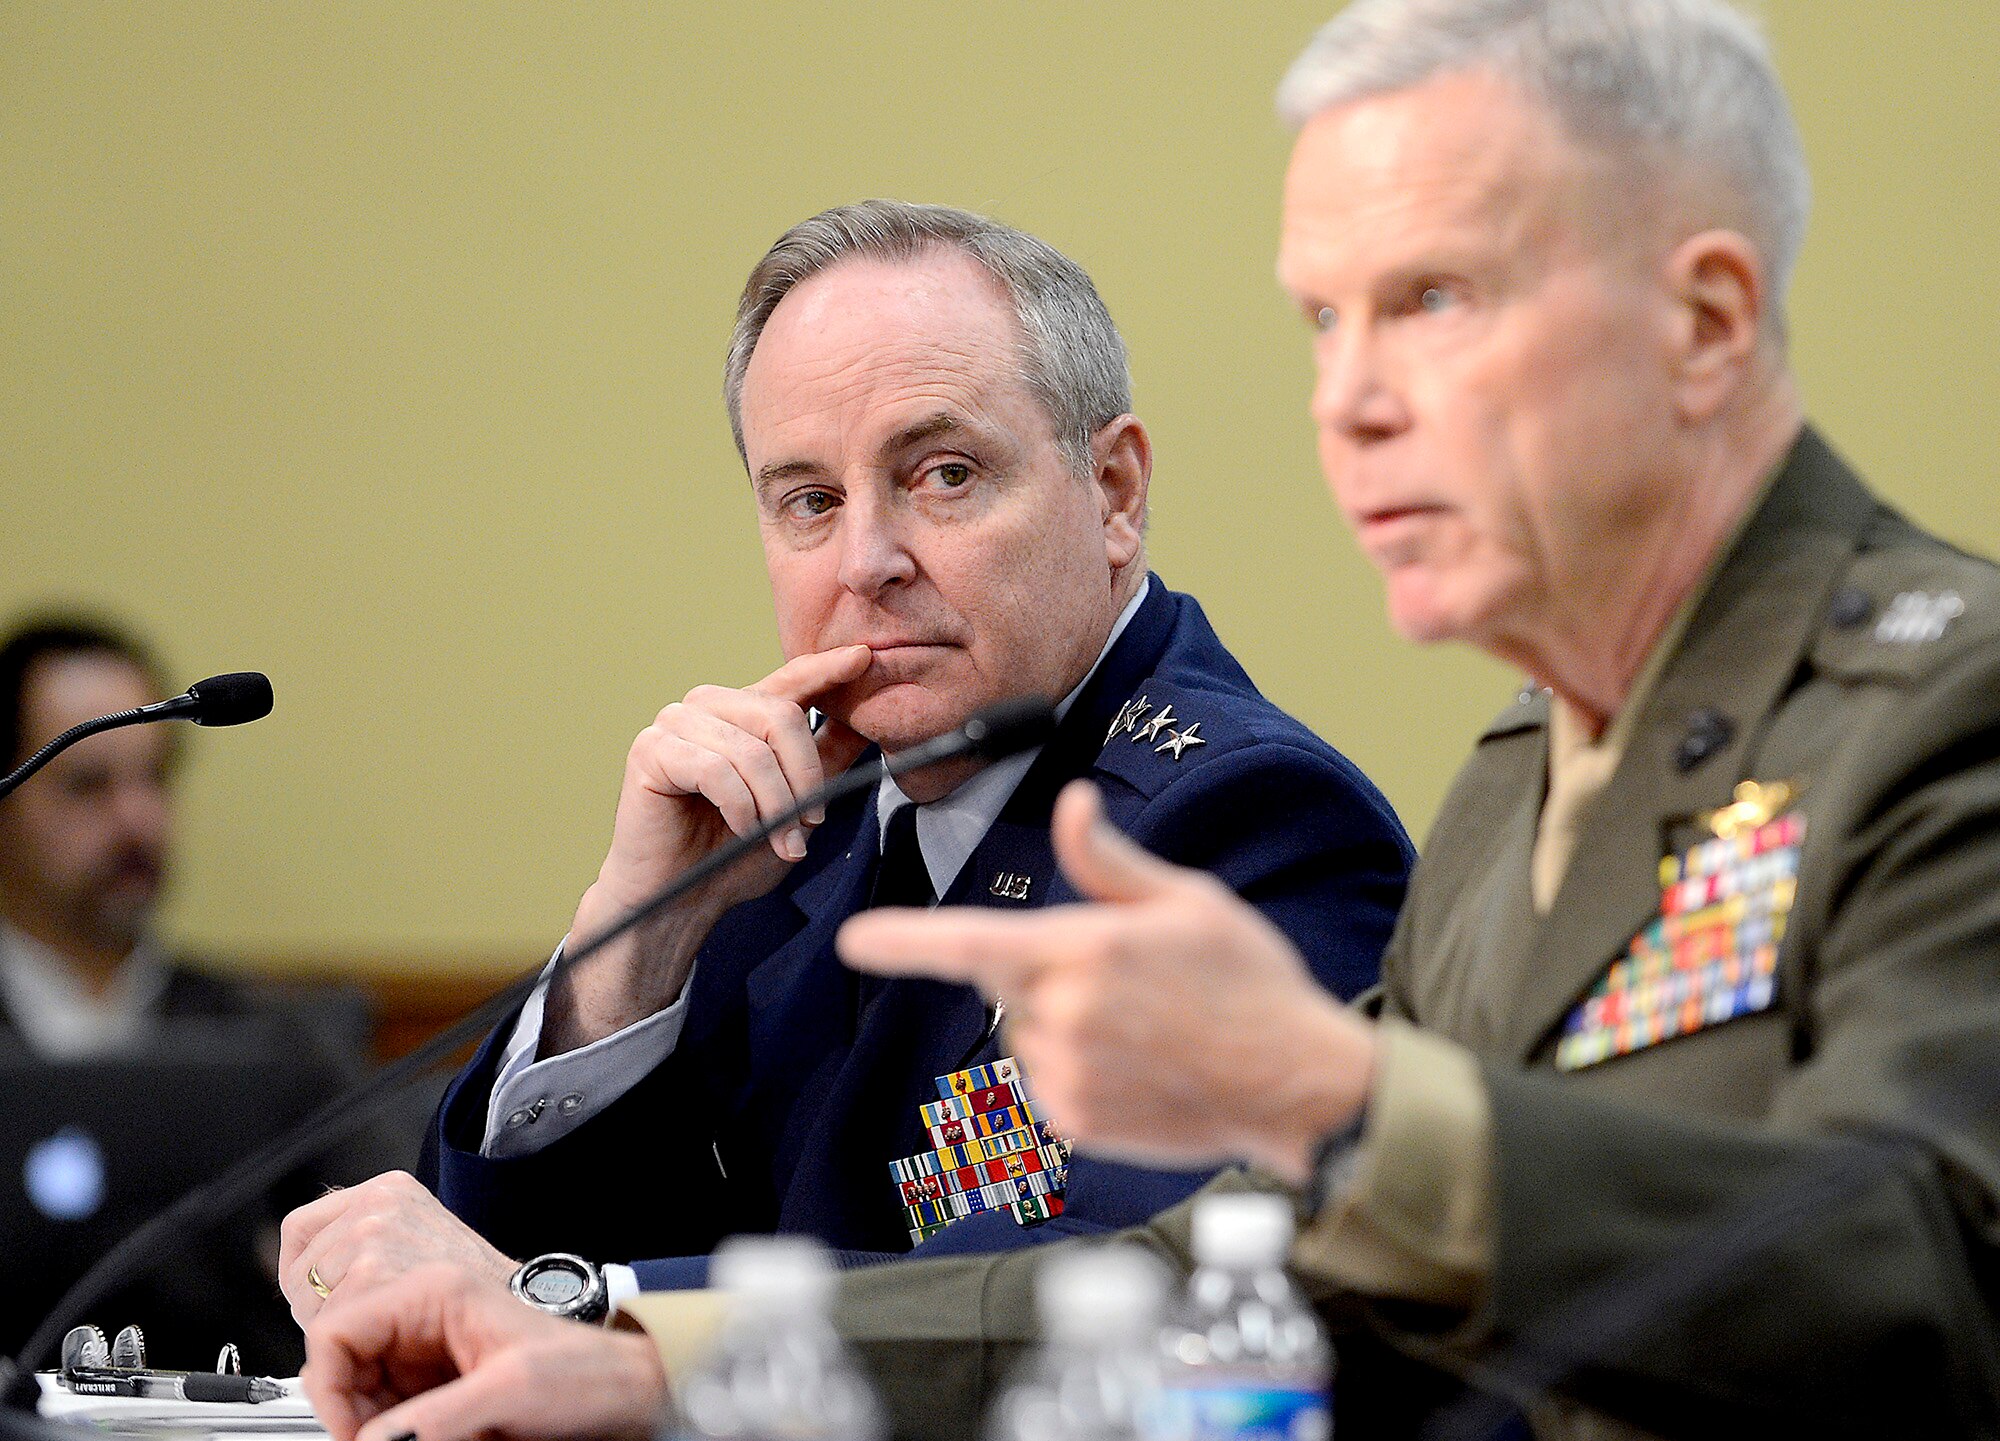 Air Force Chief of Staff Gen. Mark A. Welsh III listens to Commandant of the Marine Corps Gen. John Amos' testimony before the House Appropriations Committee's Military Construction and Veterans Affairs Subcommittee, March 5, 2013, in Washington, D.C.  (U.S. Air Force photo/Scott M. Ash)